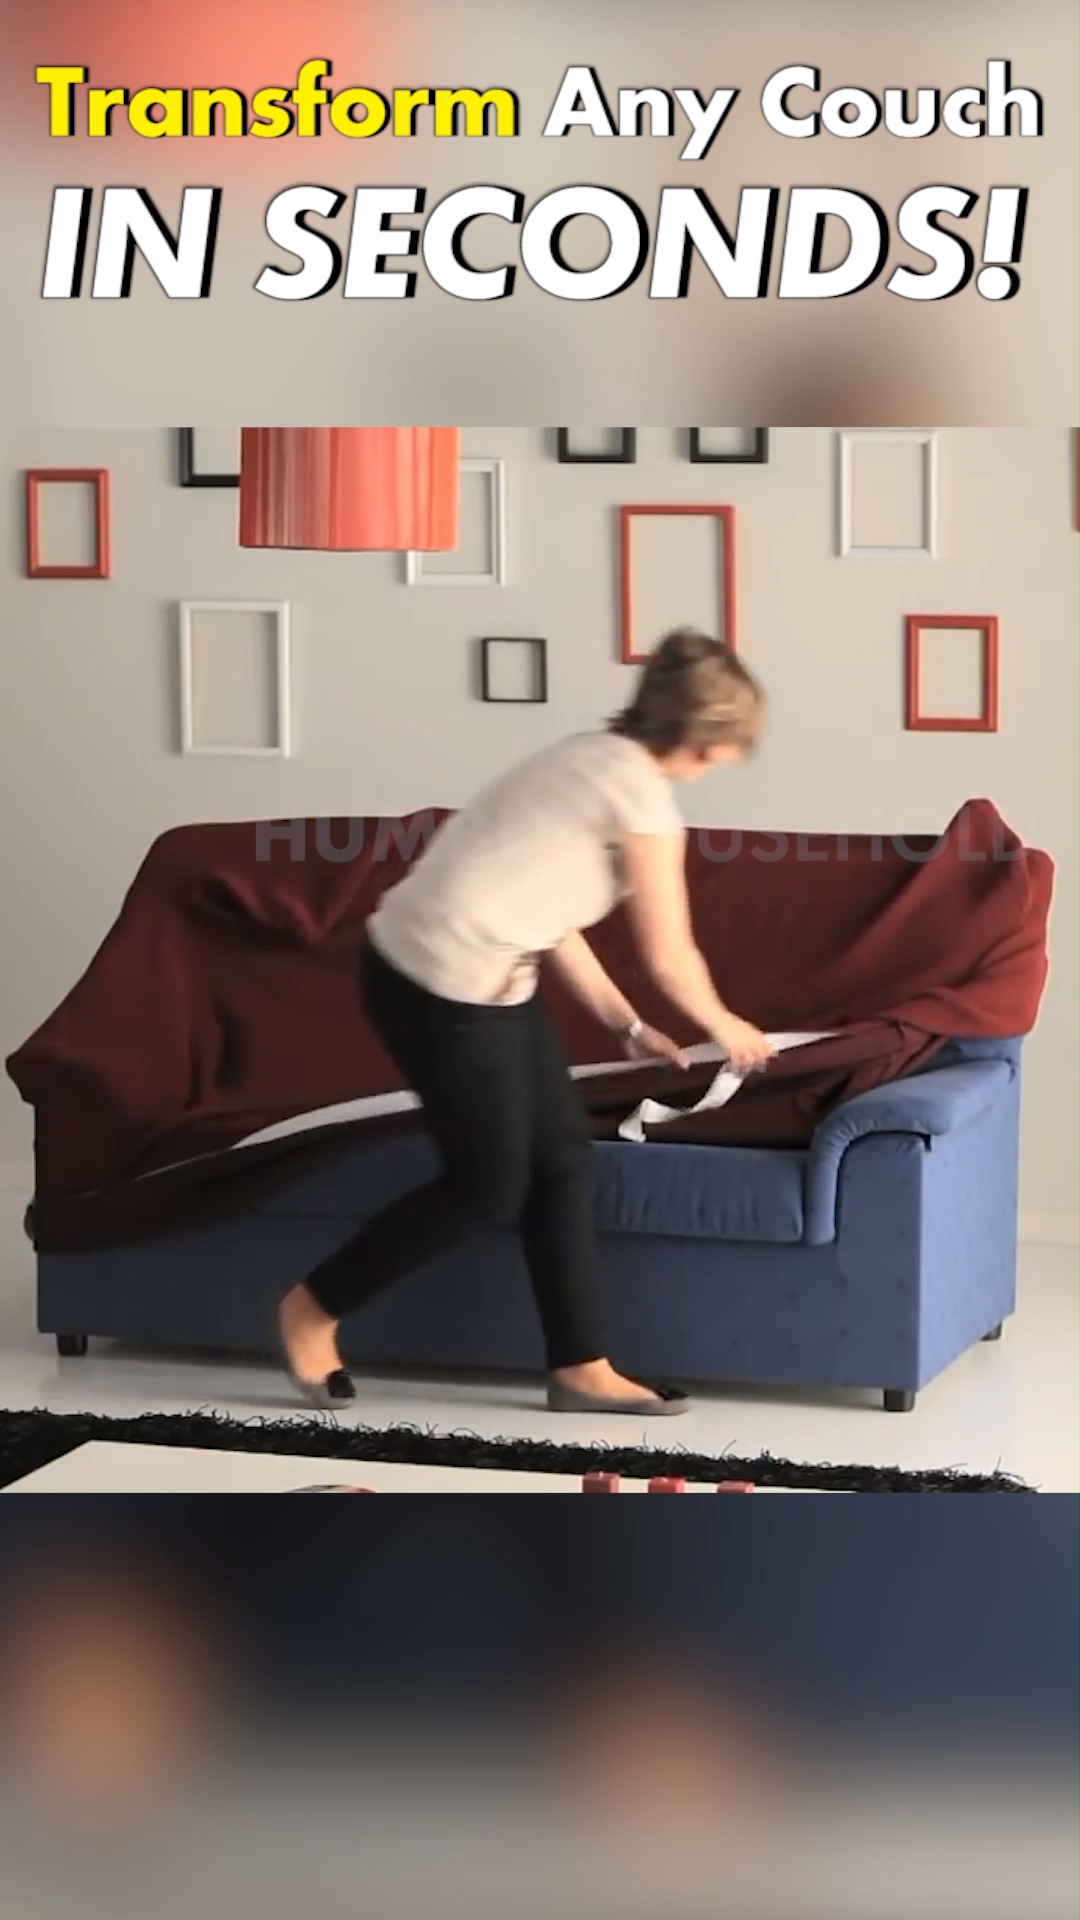 Save Money By Transforming Your Old Couch Instead Of Buying A New One!